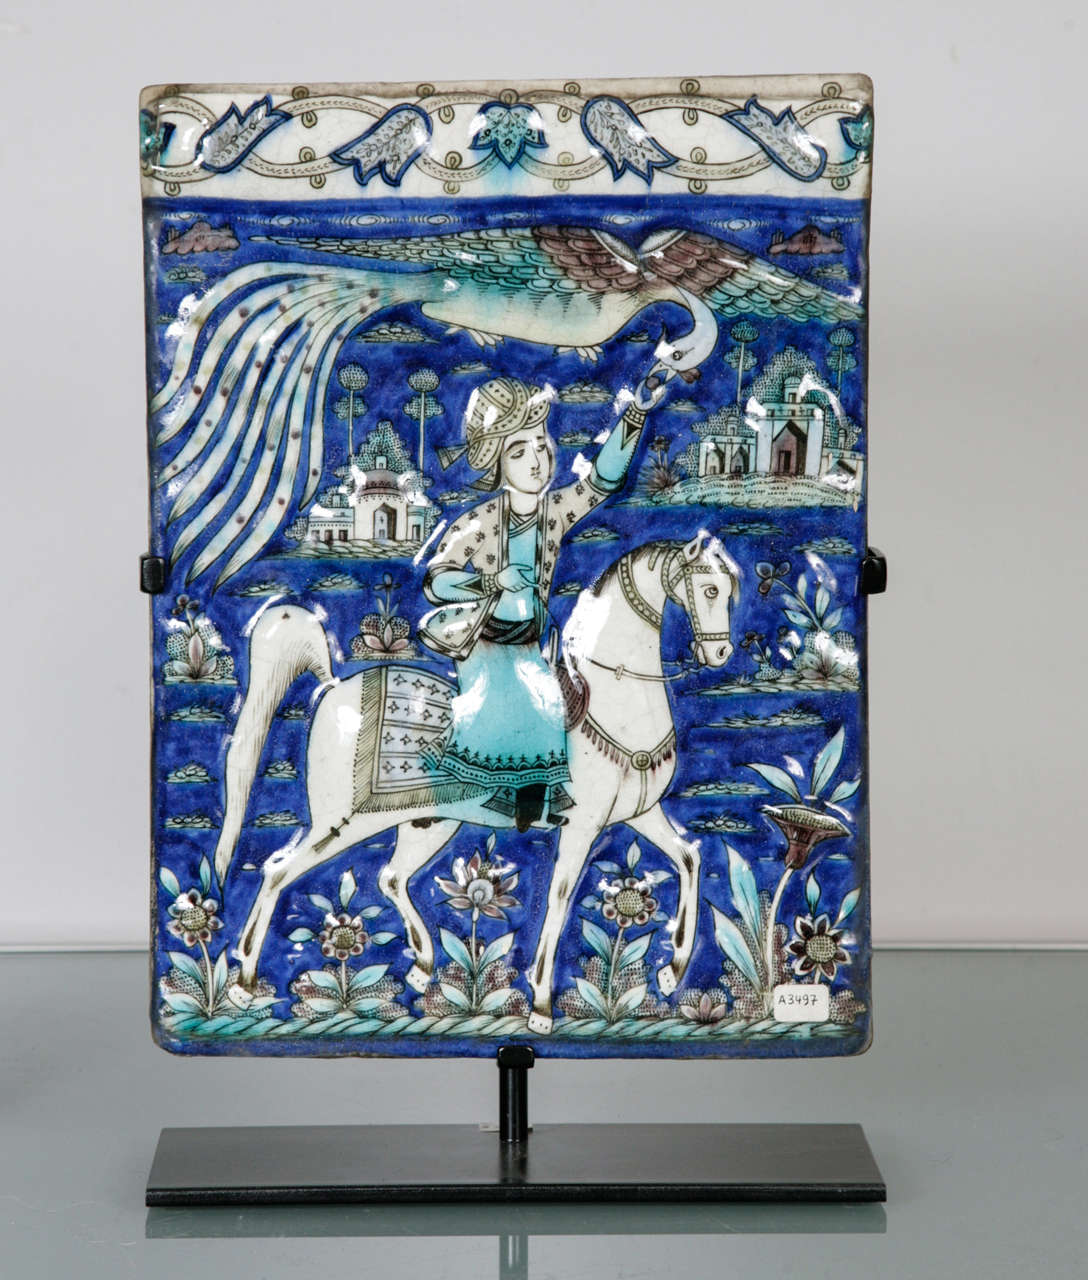 A rectangular polychrome moulded tile depicting an equestrian figure, most likely of a prince - seen extending his arm towards a phoenix-like bird called Huma, symbolic of strength and health. The background cobalt blue with decorative border and